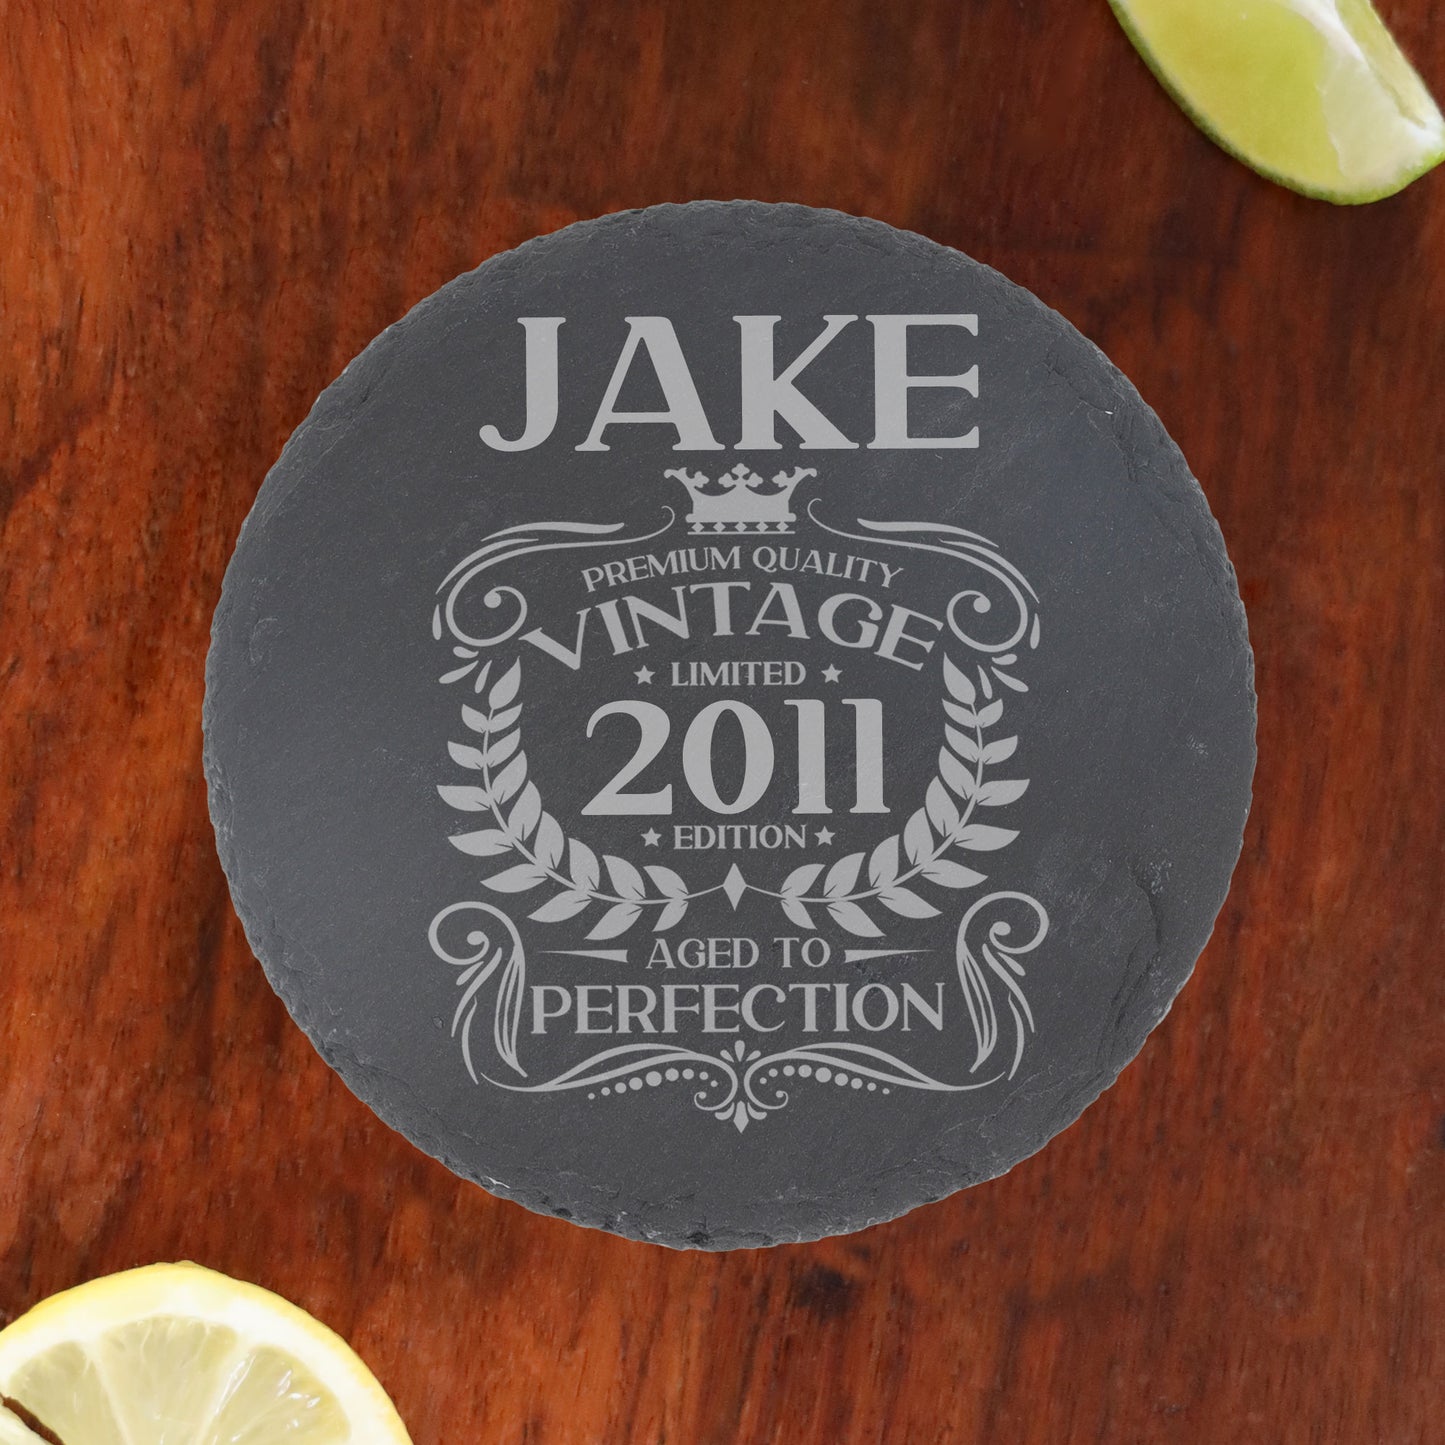 Personalised Vintage 2011 Mug and/or Coaster  - Always Looking Good - Round Coaster On Its Own  